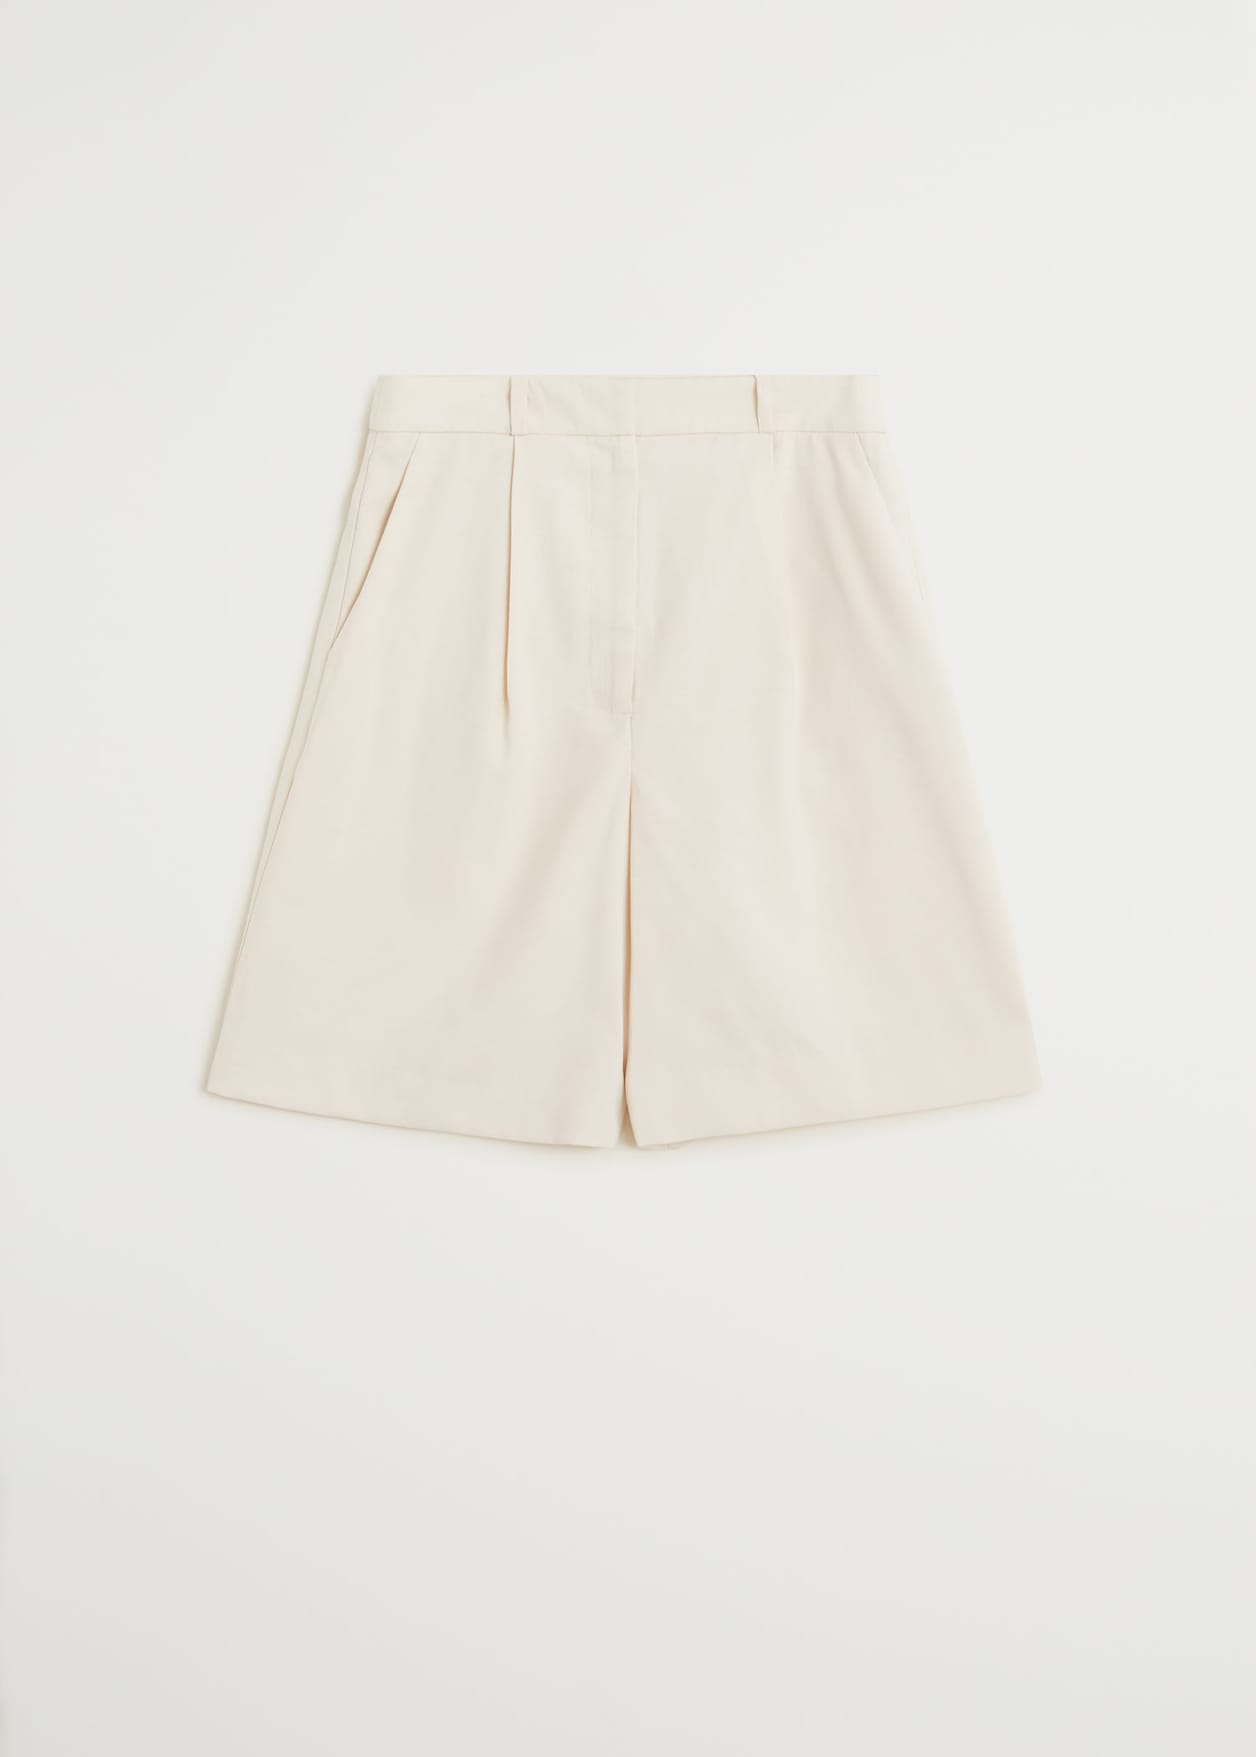 High waist suit bermuda shorts from Shorts collection you can buy now from Fashion And Icon online shop